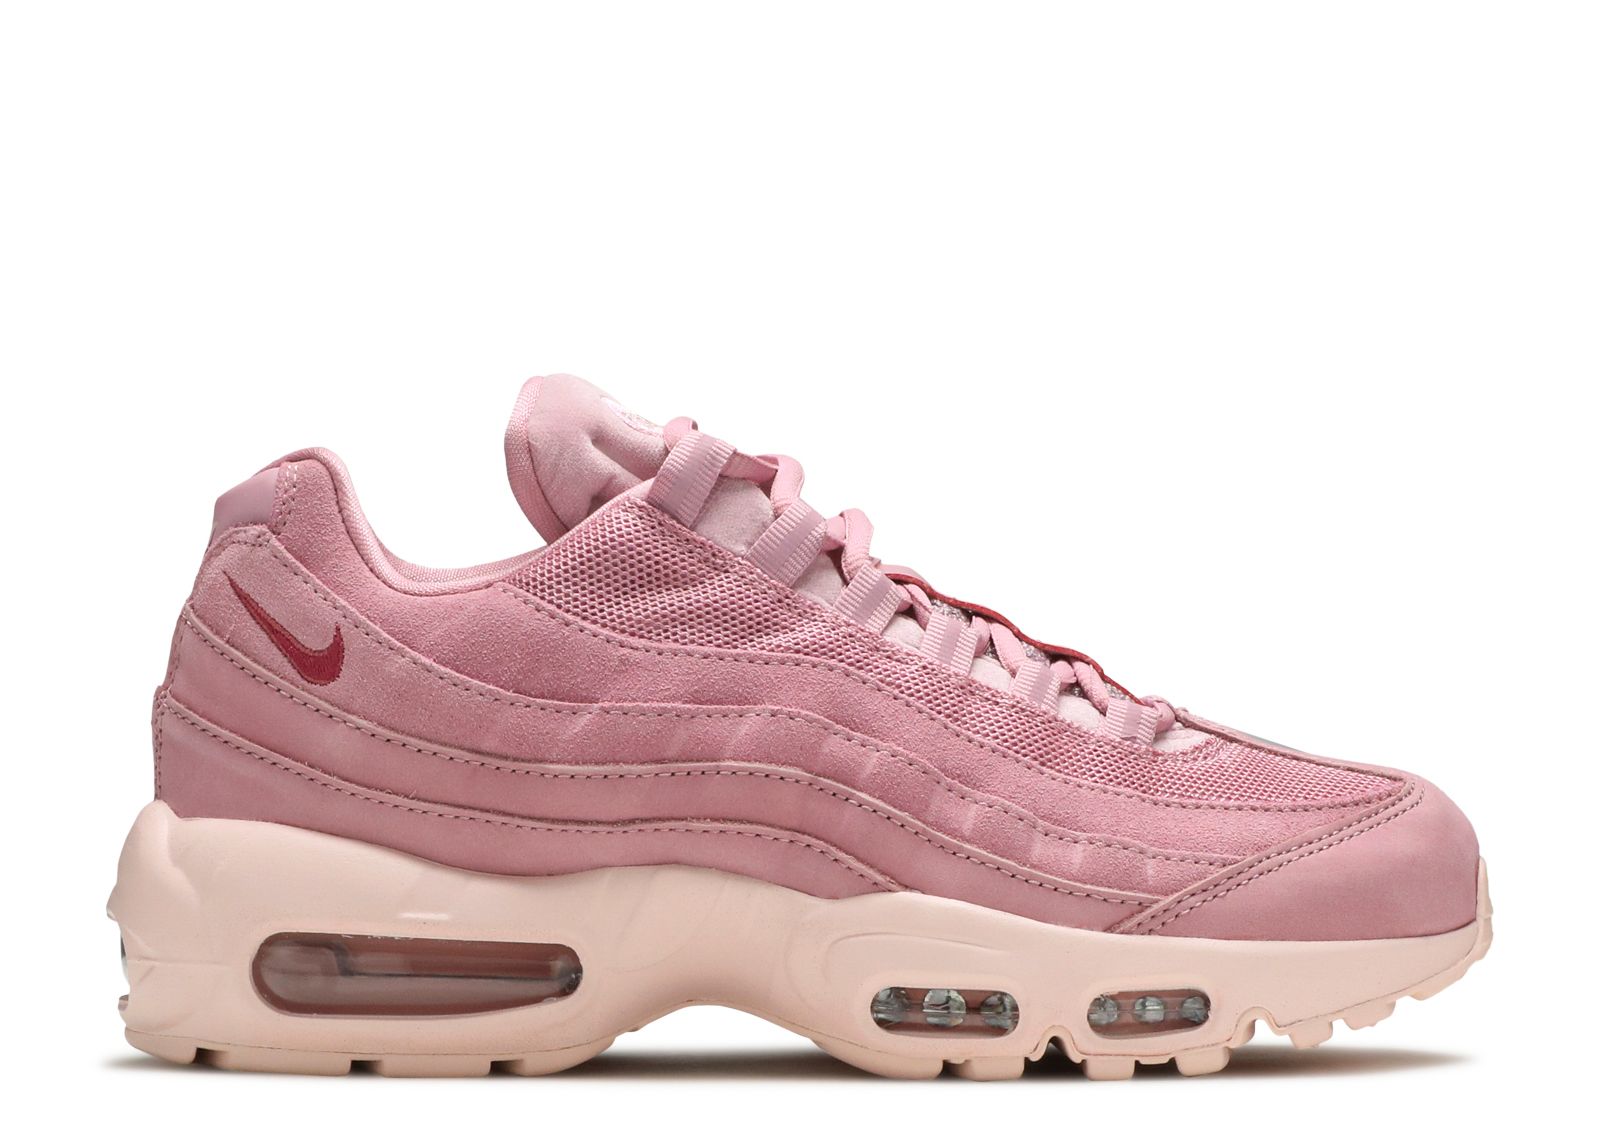 Кроссовки Nike Wmns Air Max 95 Se 'Cherry Blossom', розовый authentic nike air max 95 men cherry blossom worldwide pack yin yang running shoes original trainers sports sneakers runners